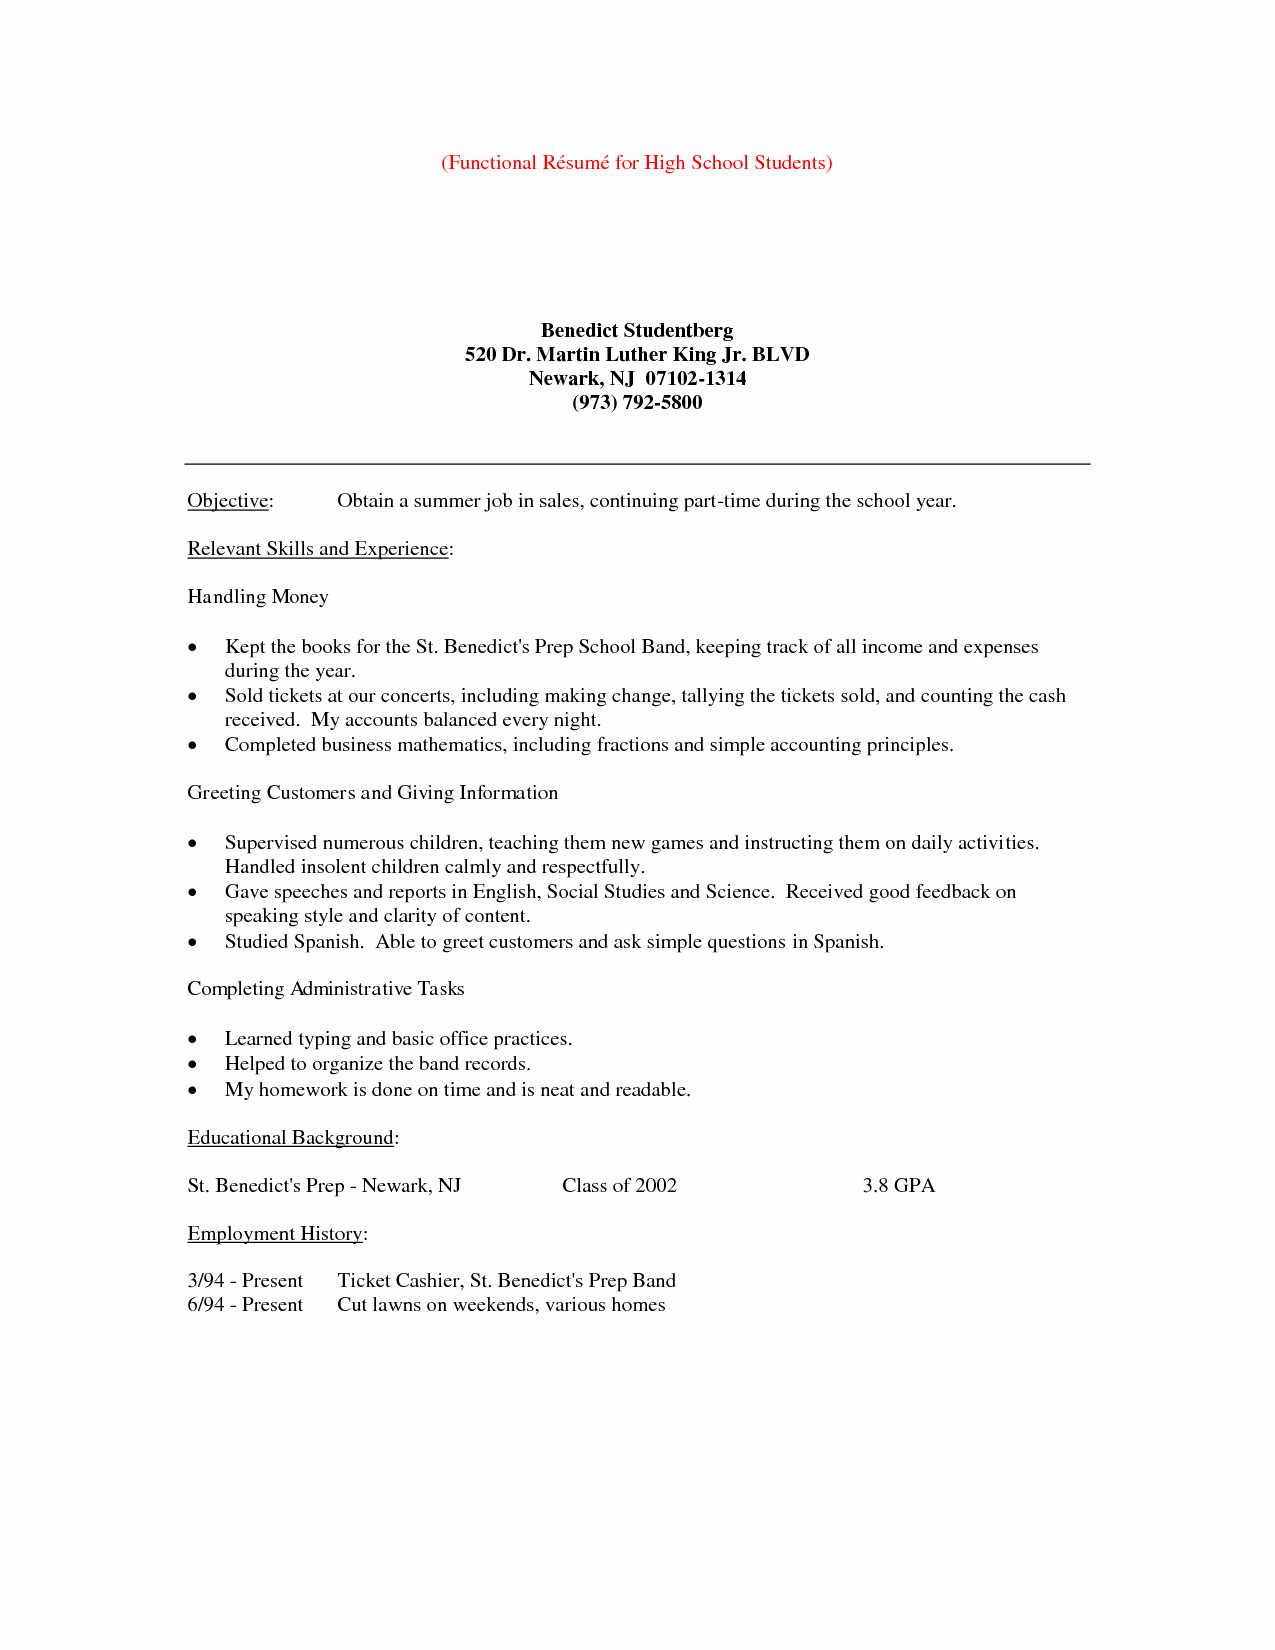 Job Resume Example for Highschool Students Template with